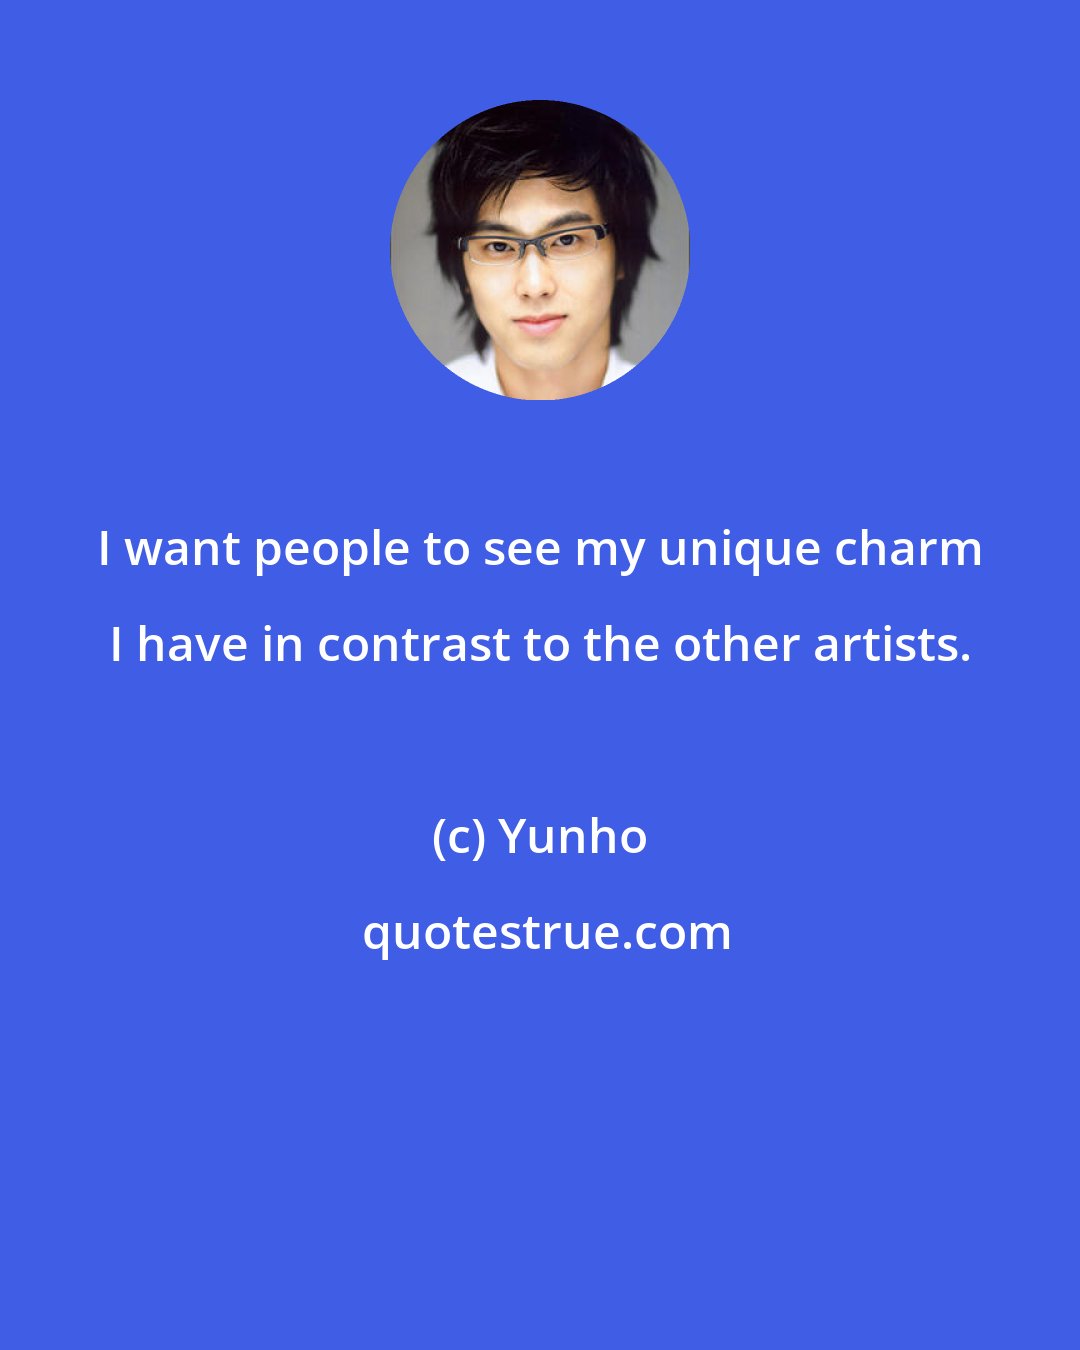 Yunho: I want people to see my unique charm I have in contrast to the other artists.